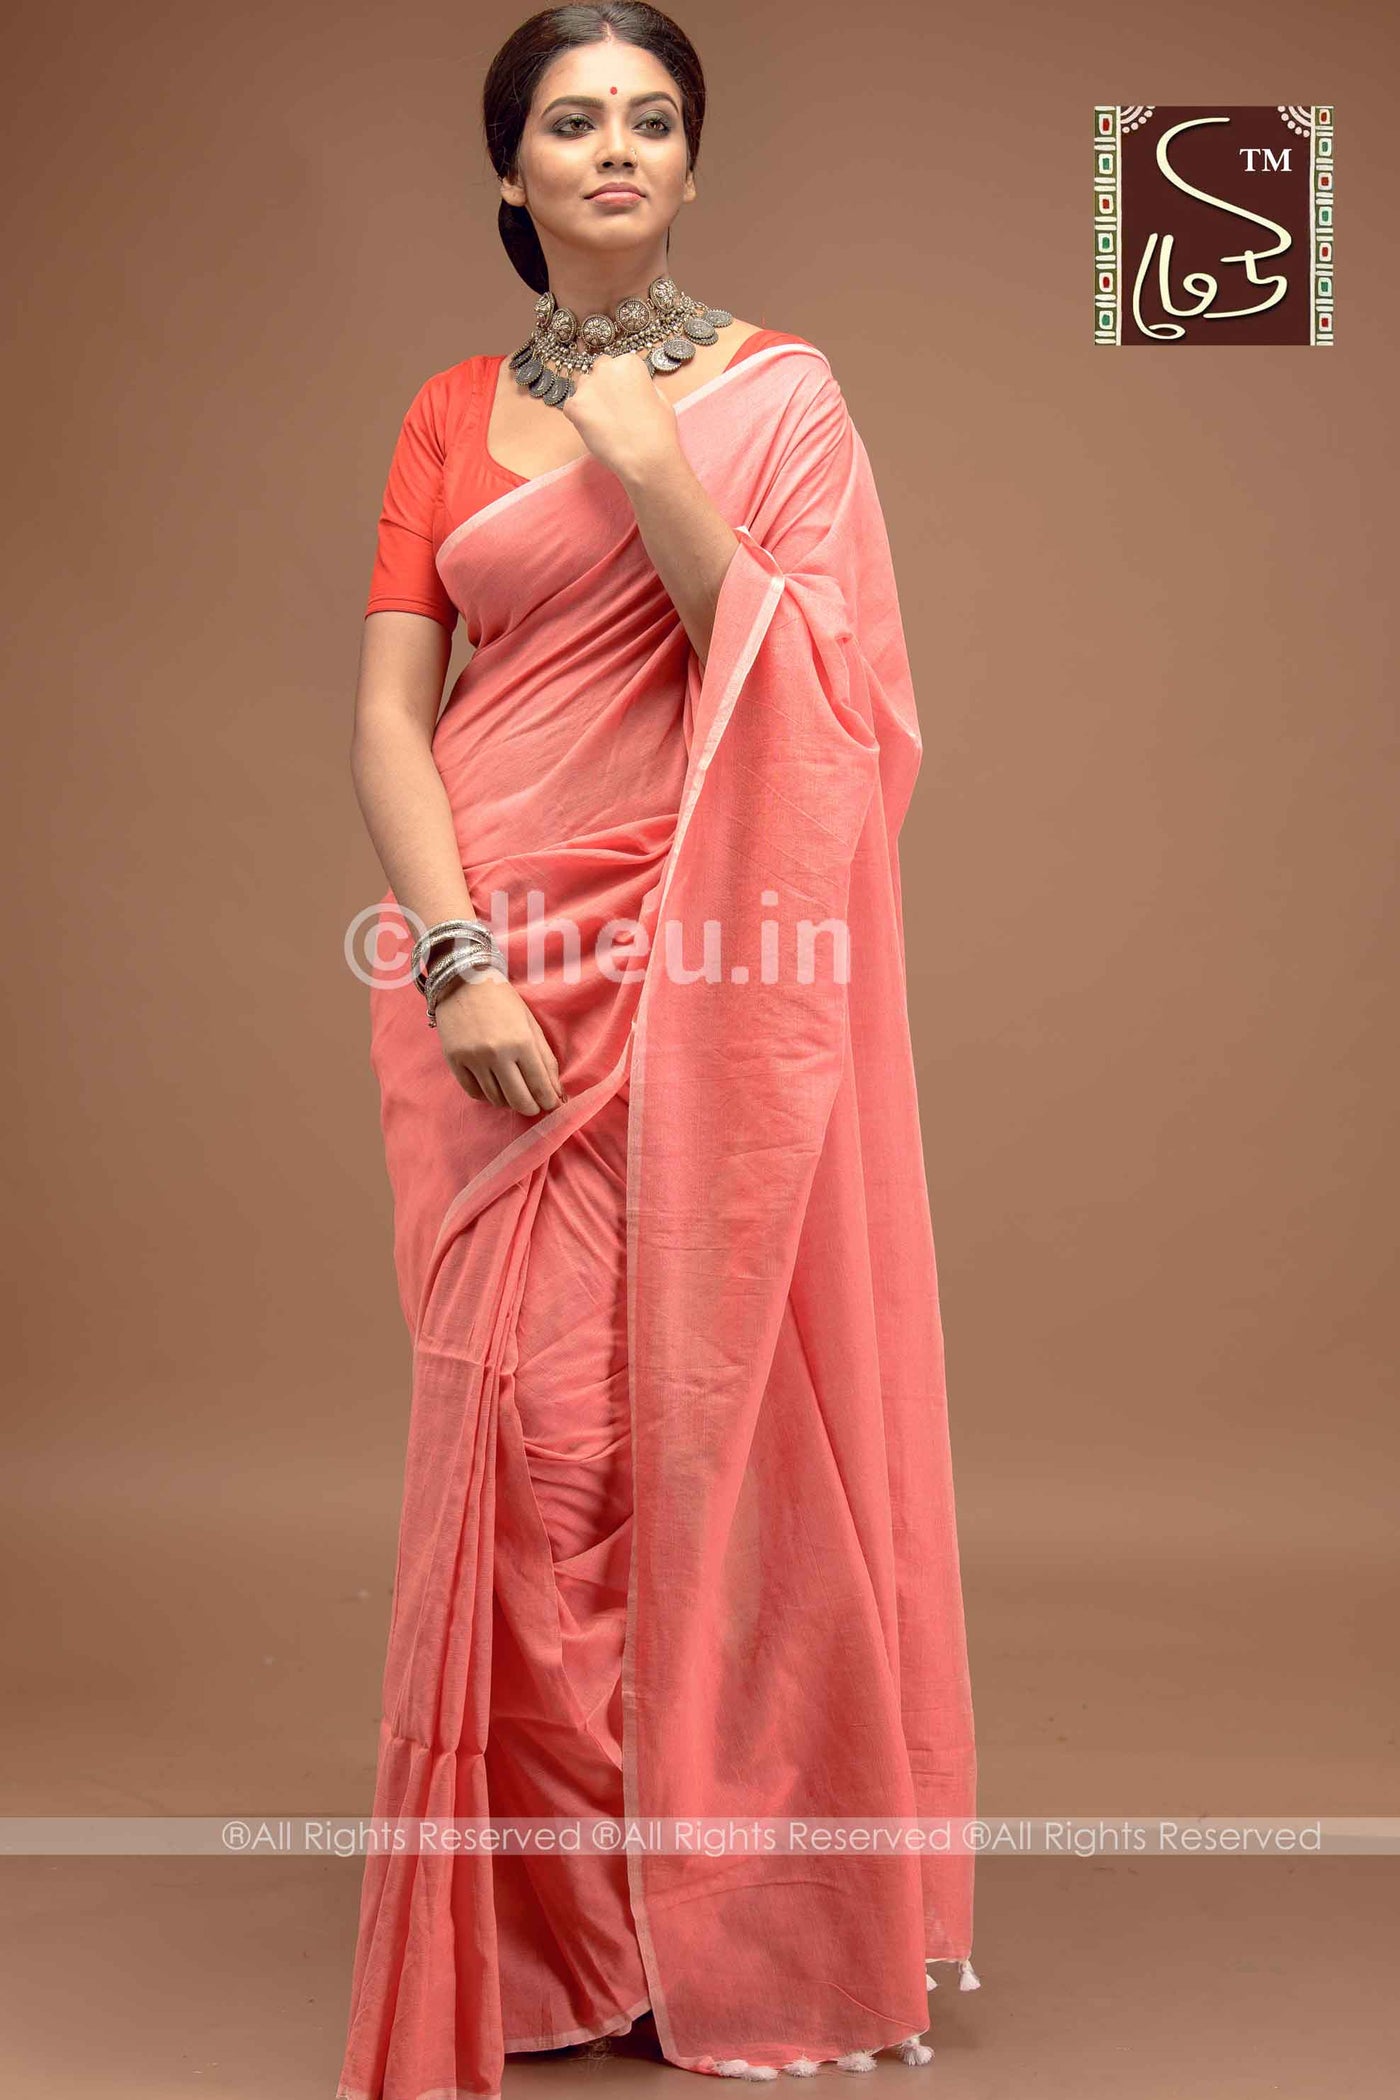 Silk Finish Soft Light weight Handloom Cotton saree at low cost only at dheu.in